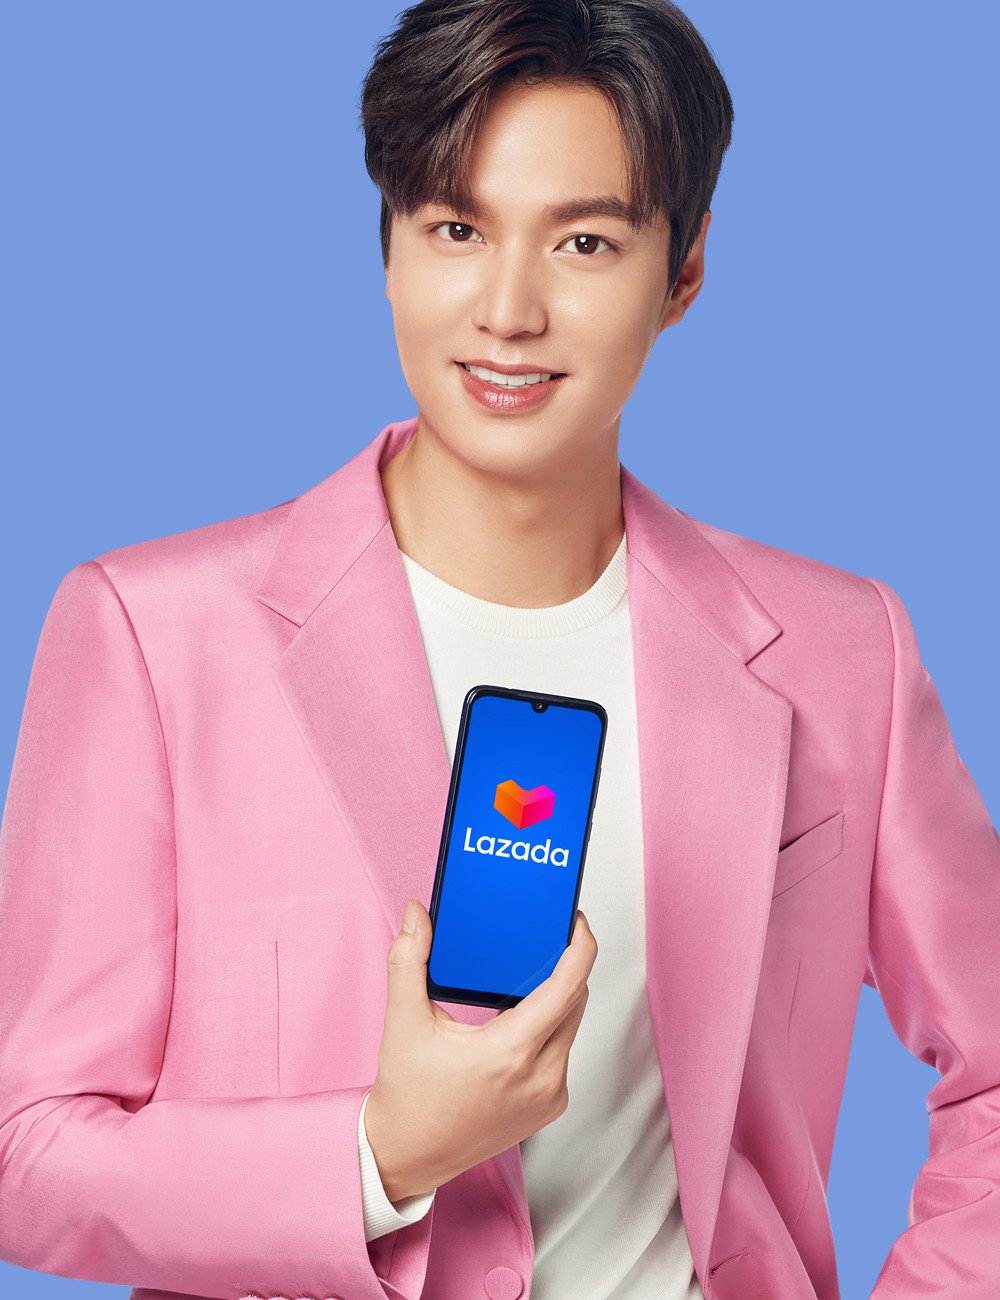 Lee Min Ho Set To Make Hollywood Debut With Apples New 